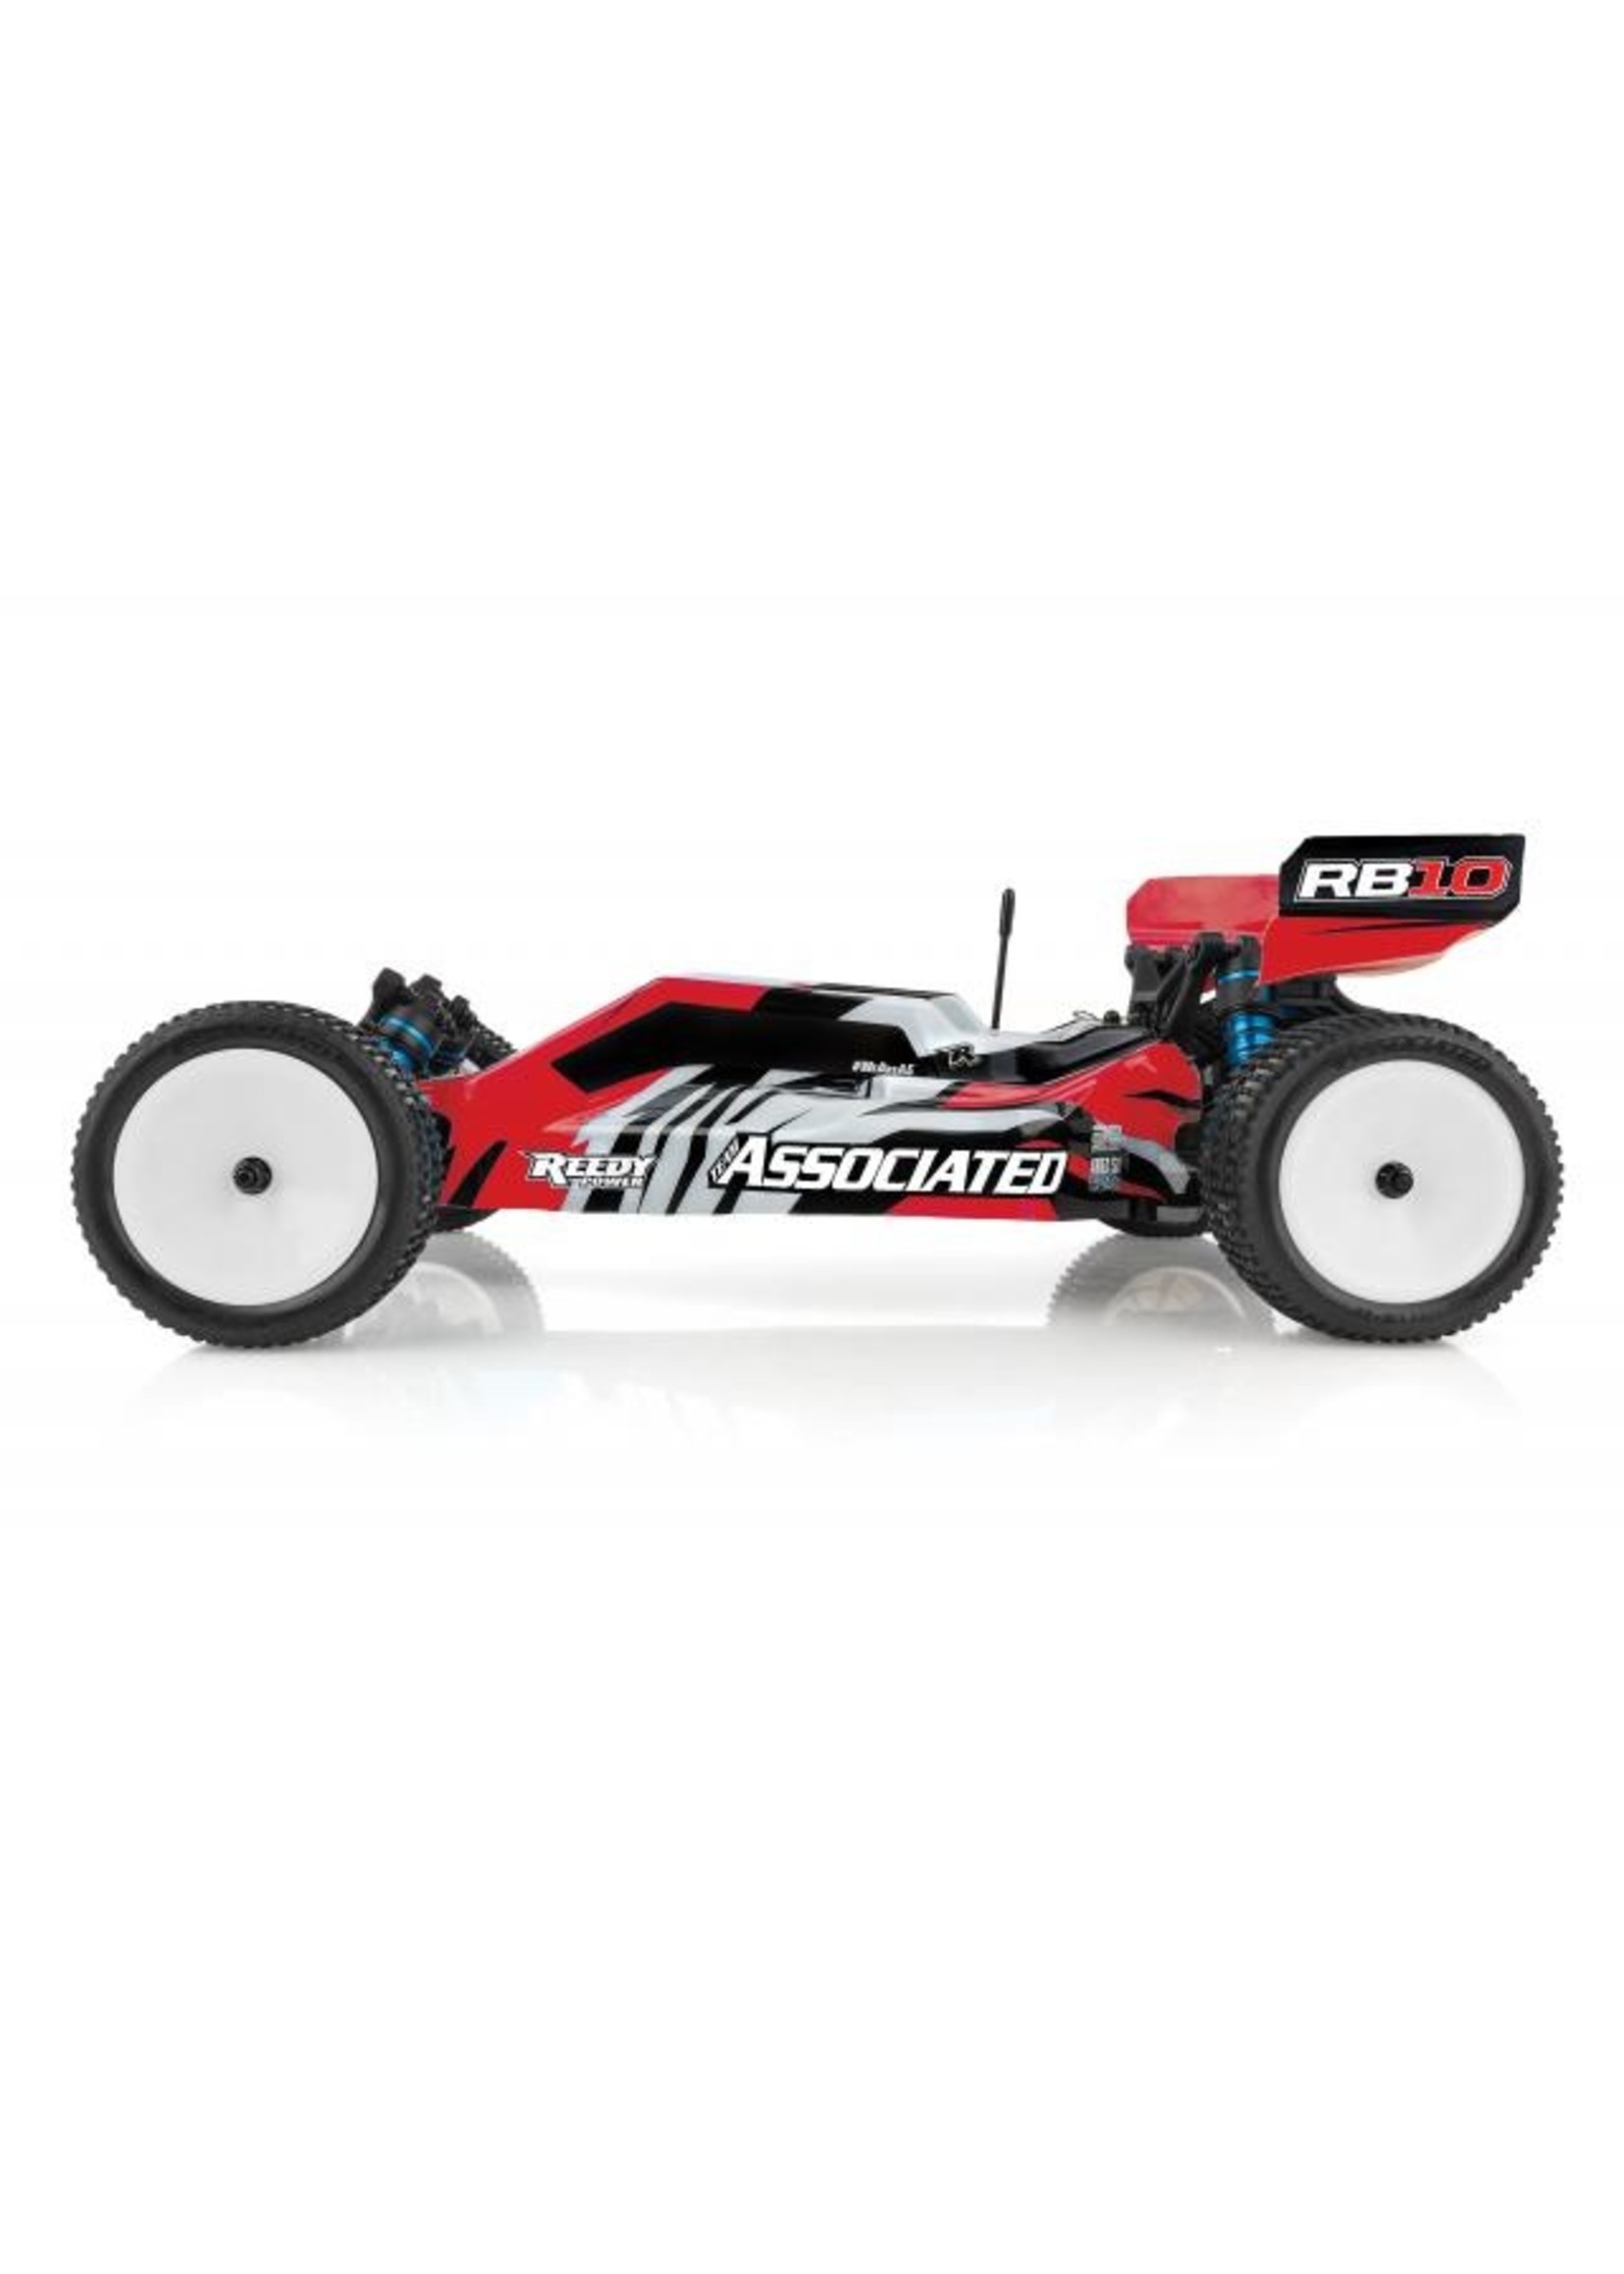 Associated 1/10 RB10 RTR 2WD Buggy - Red